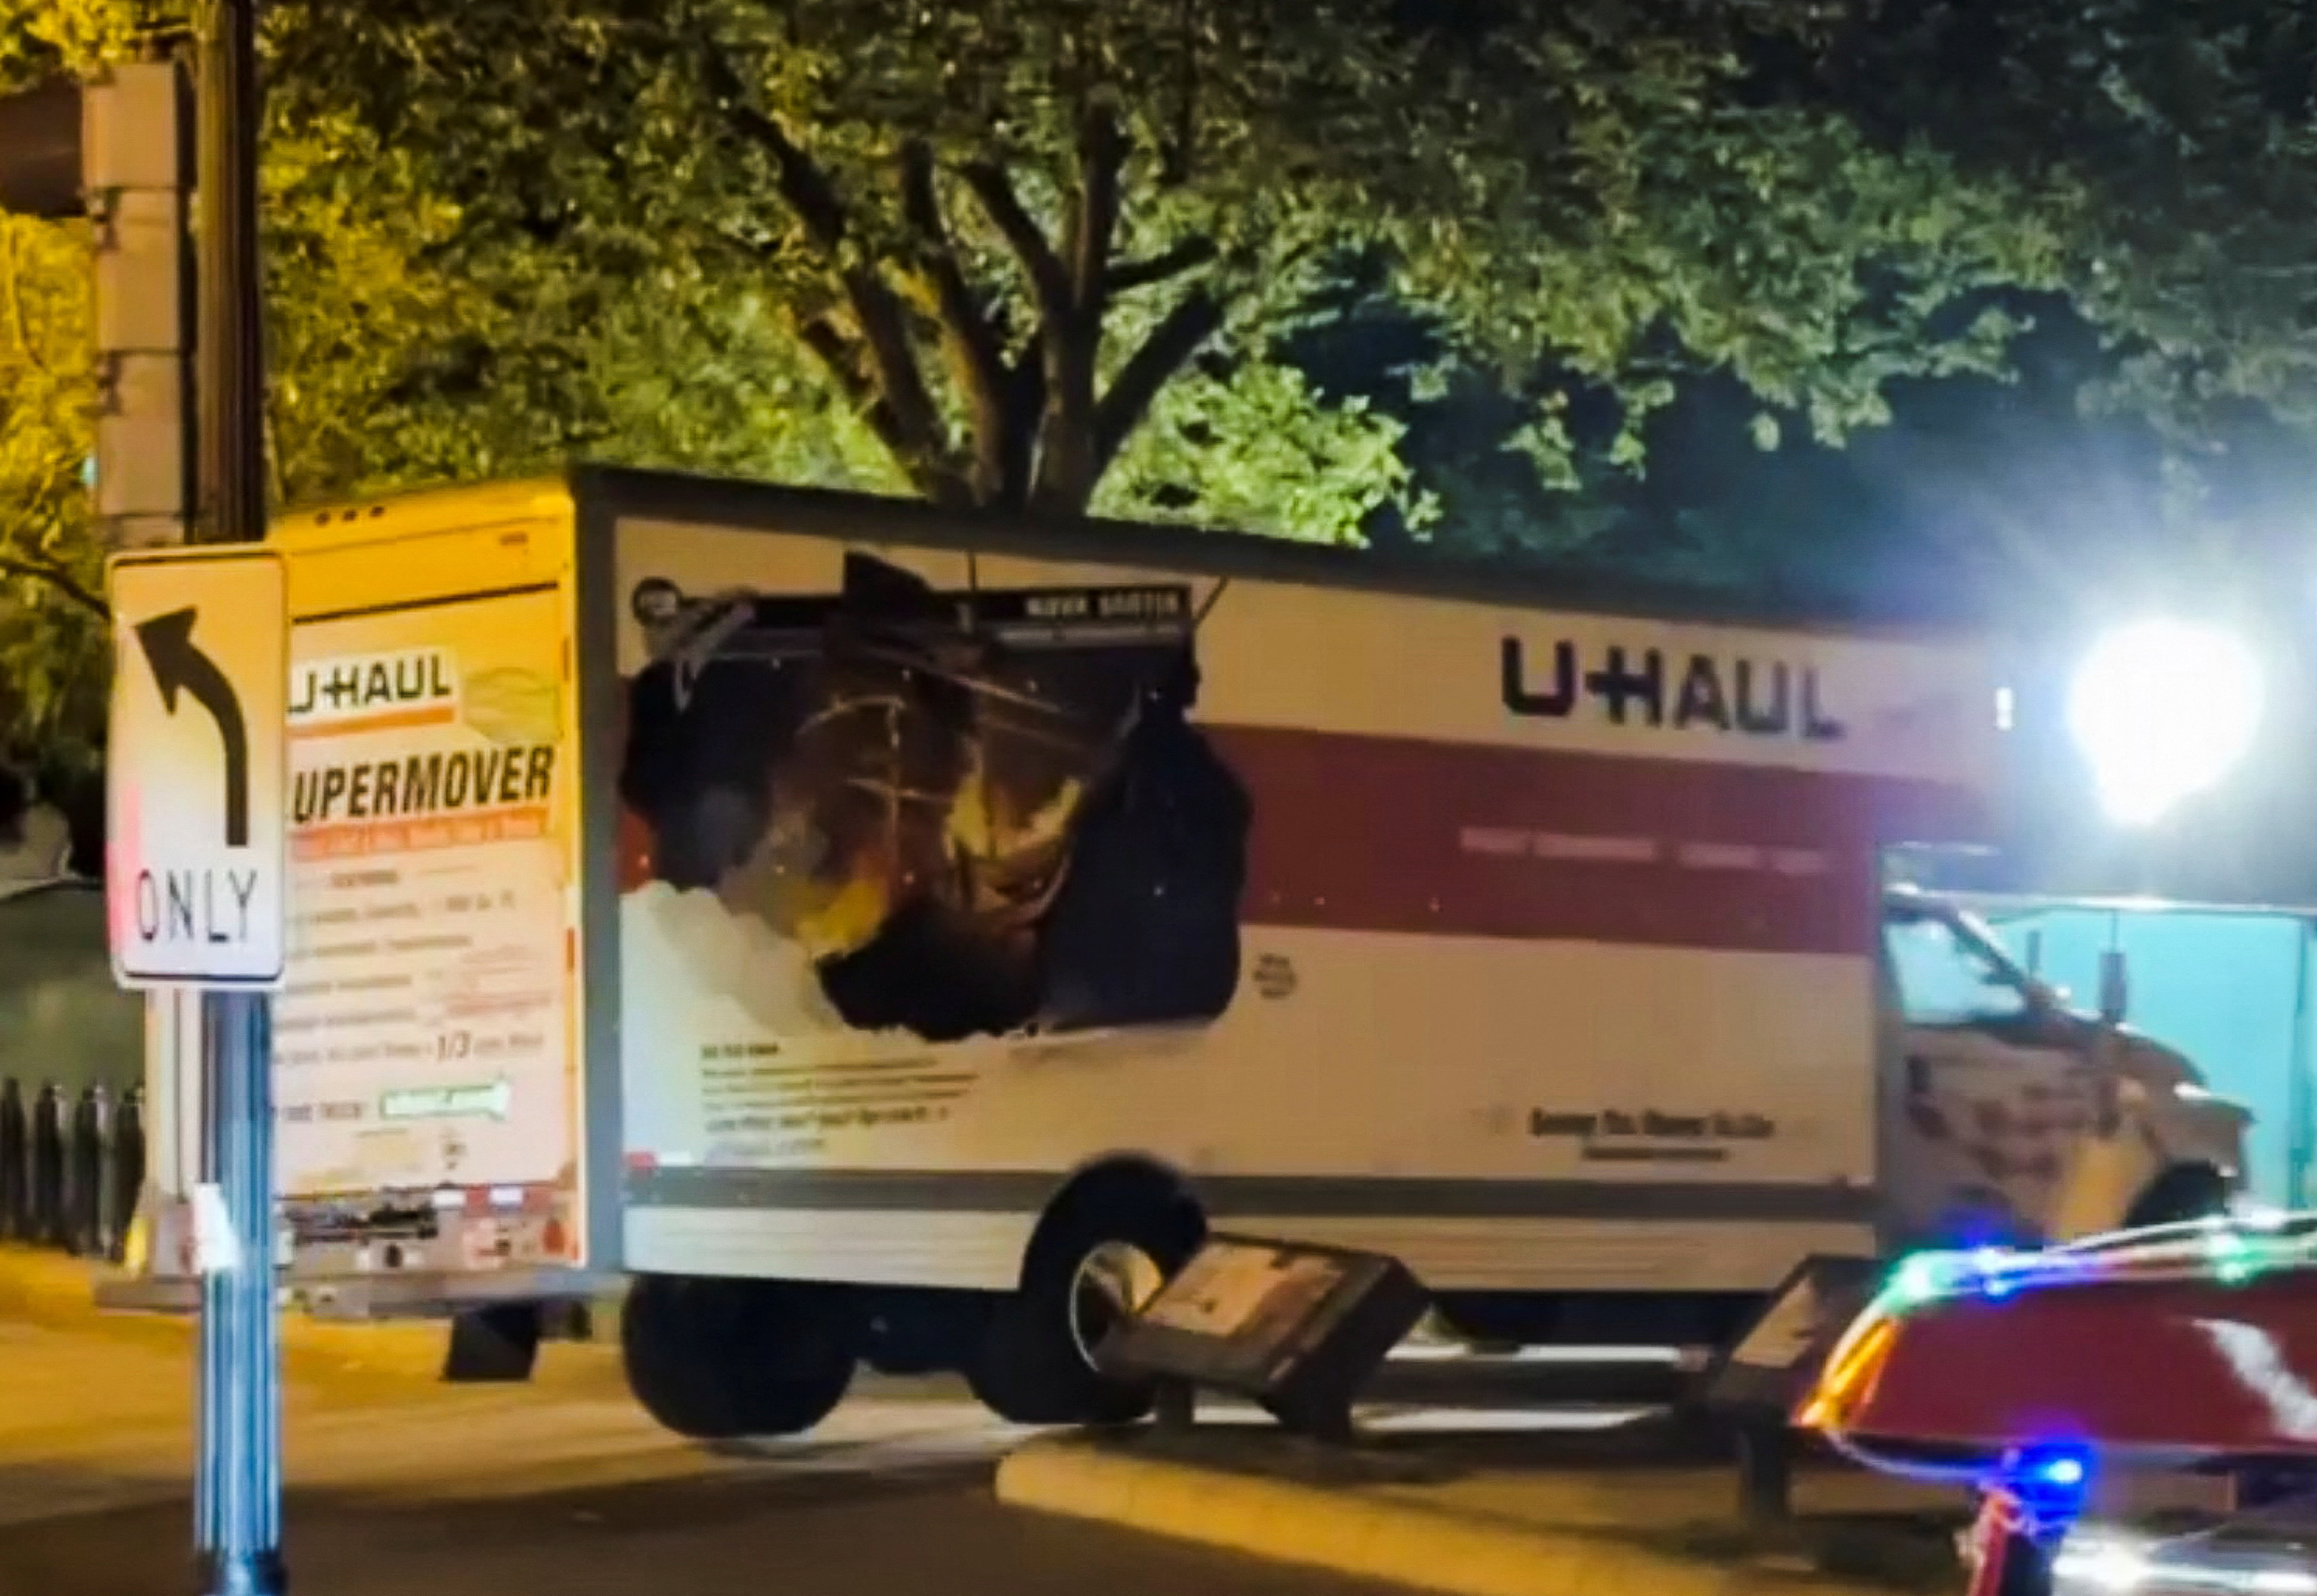 A box truck crashes into security barriers in Lafayette Square next to the White House grounds in Washington